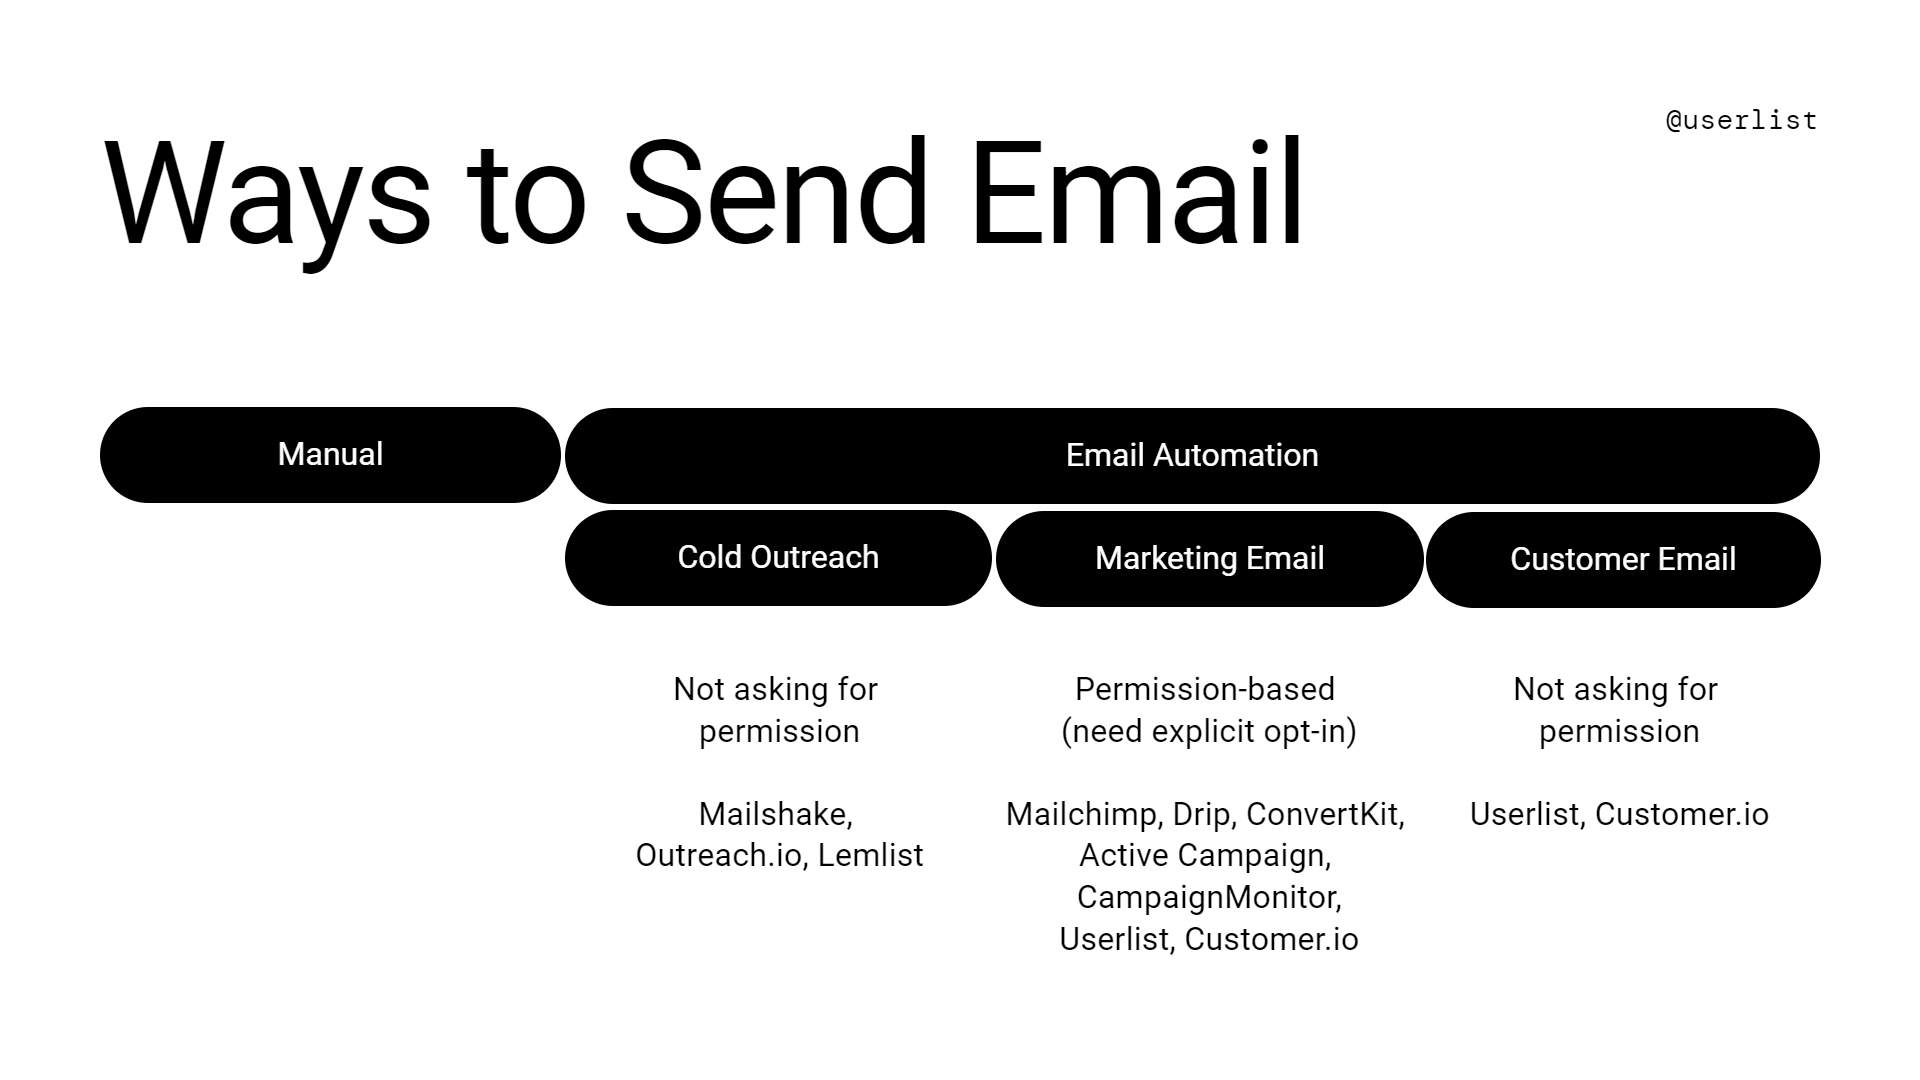 Types of email: Ways of sending email